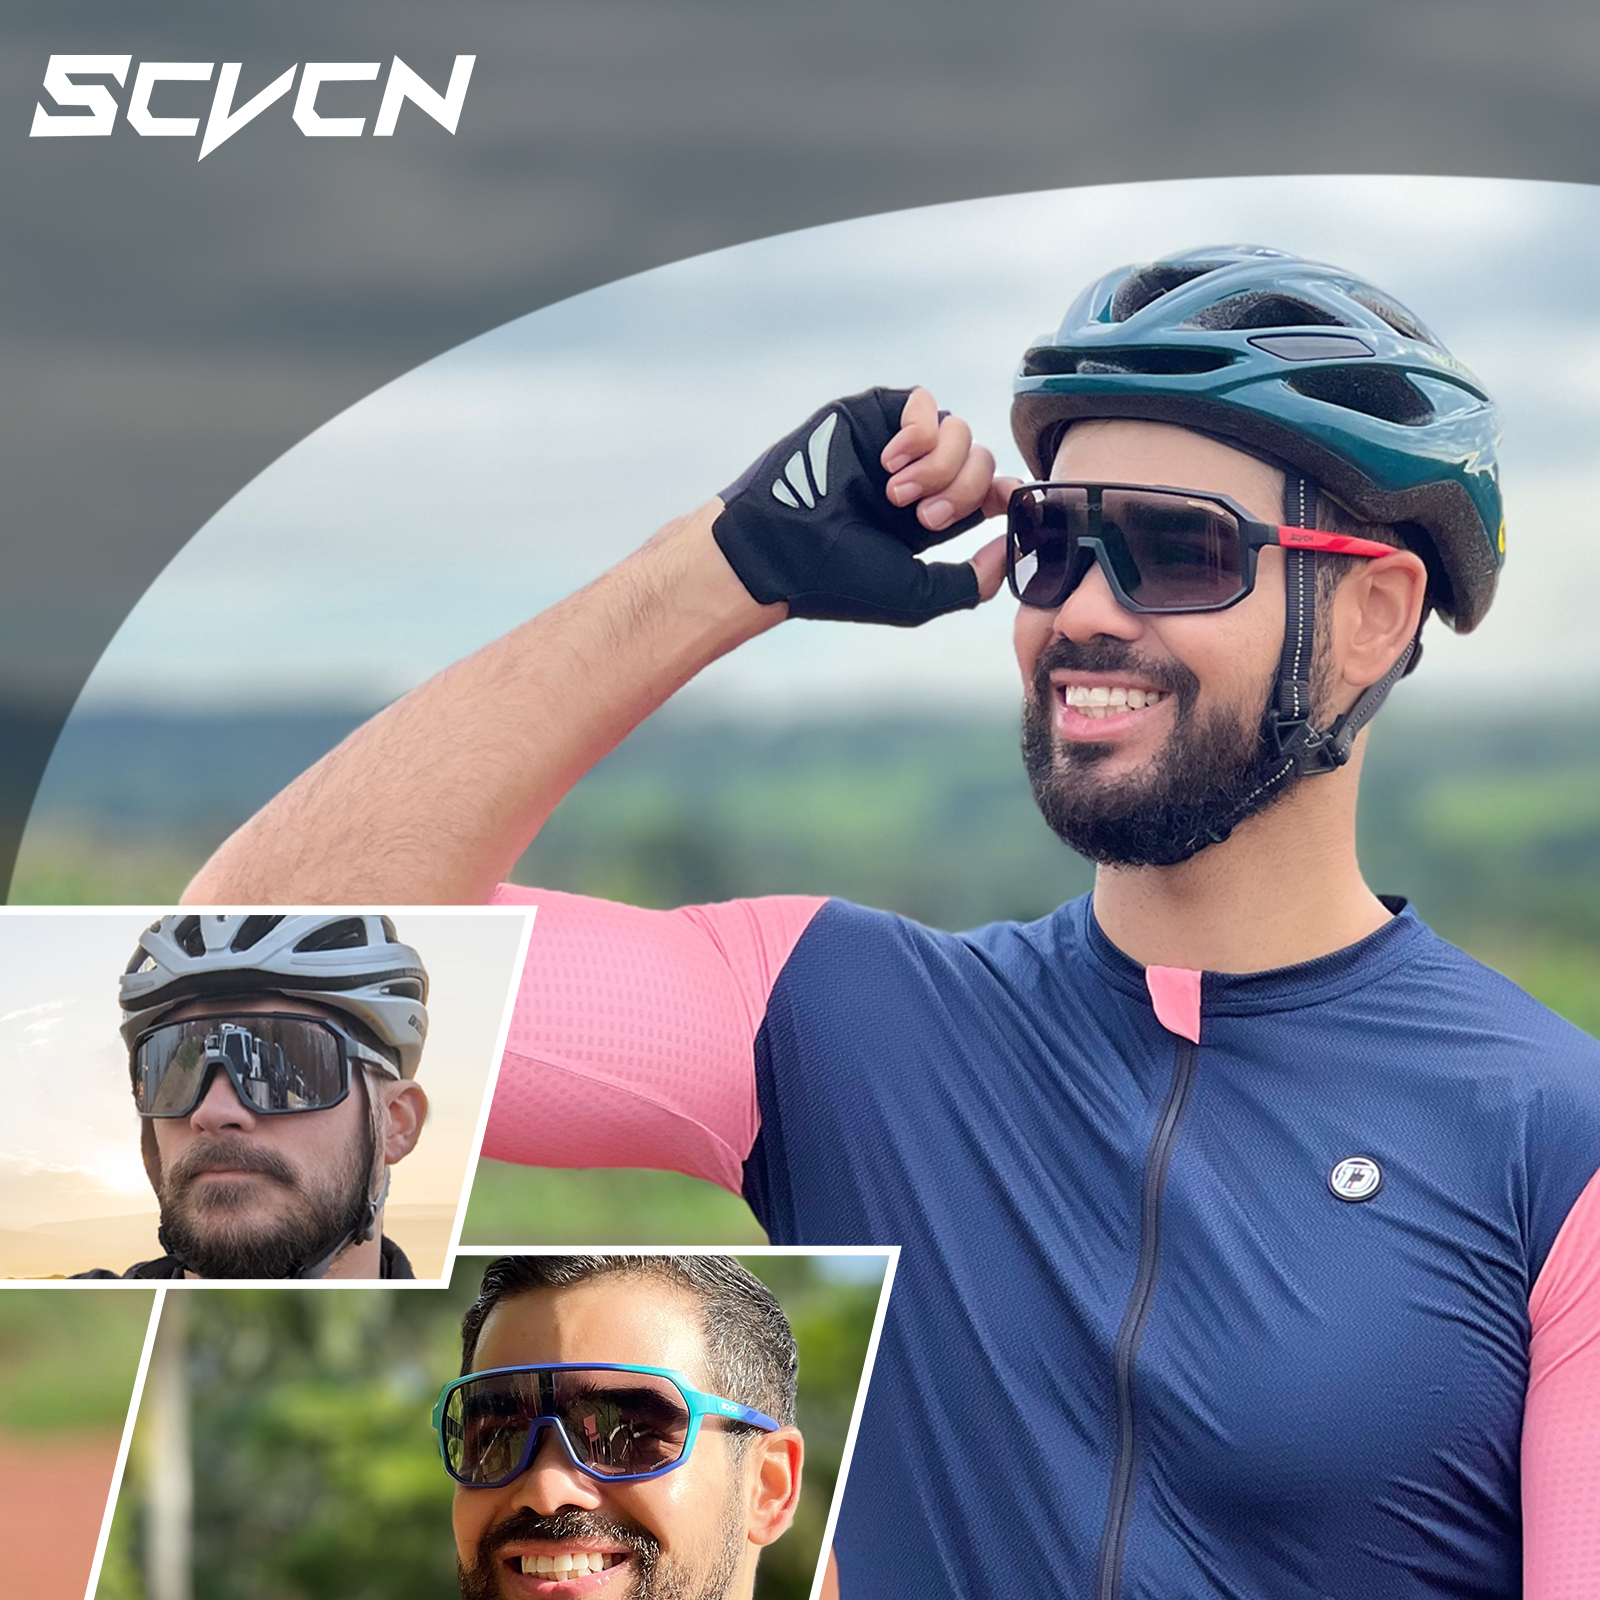 Summe UV400 Cycling Sunglasses For Men And Women Stylish Sun Glasses For  Sports, Driving, Riding Windproof And Cool Eyeglasses With Goggle  Sunglasses From Funny6631, $2.98